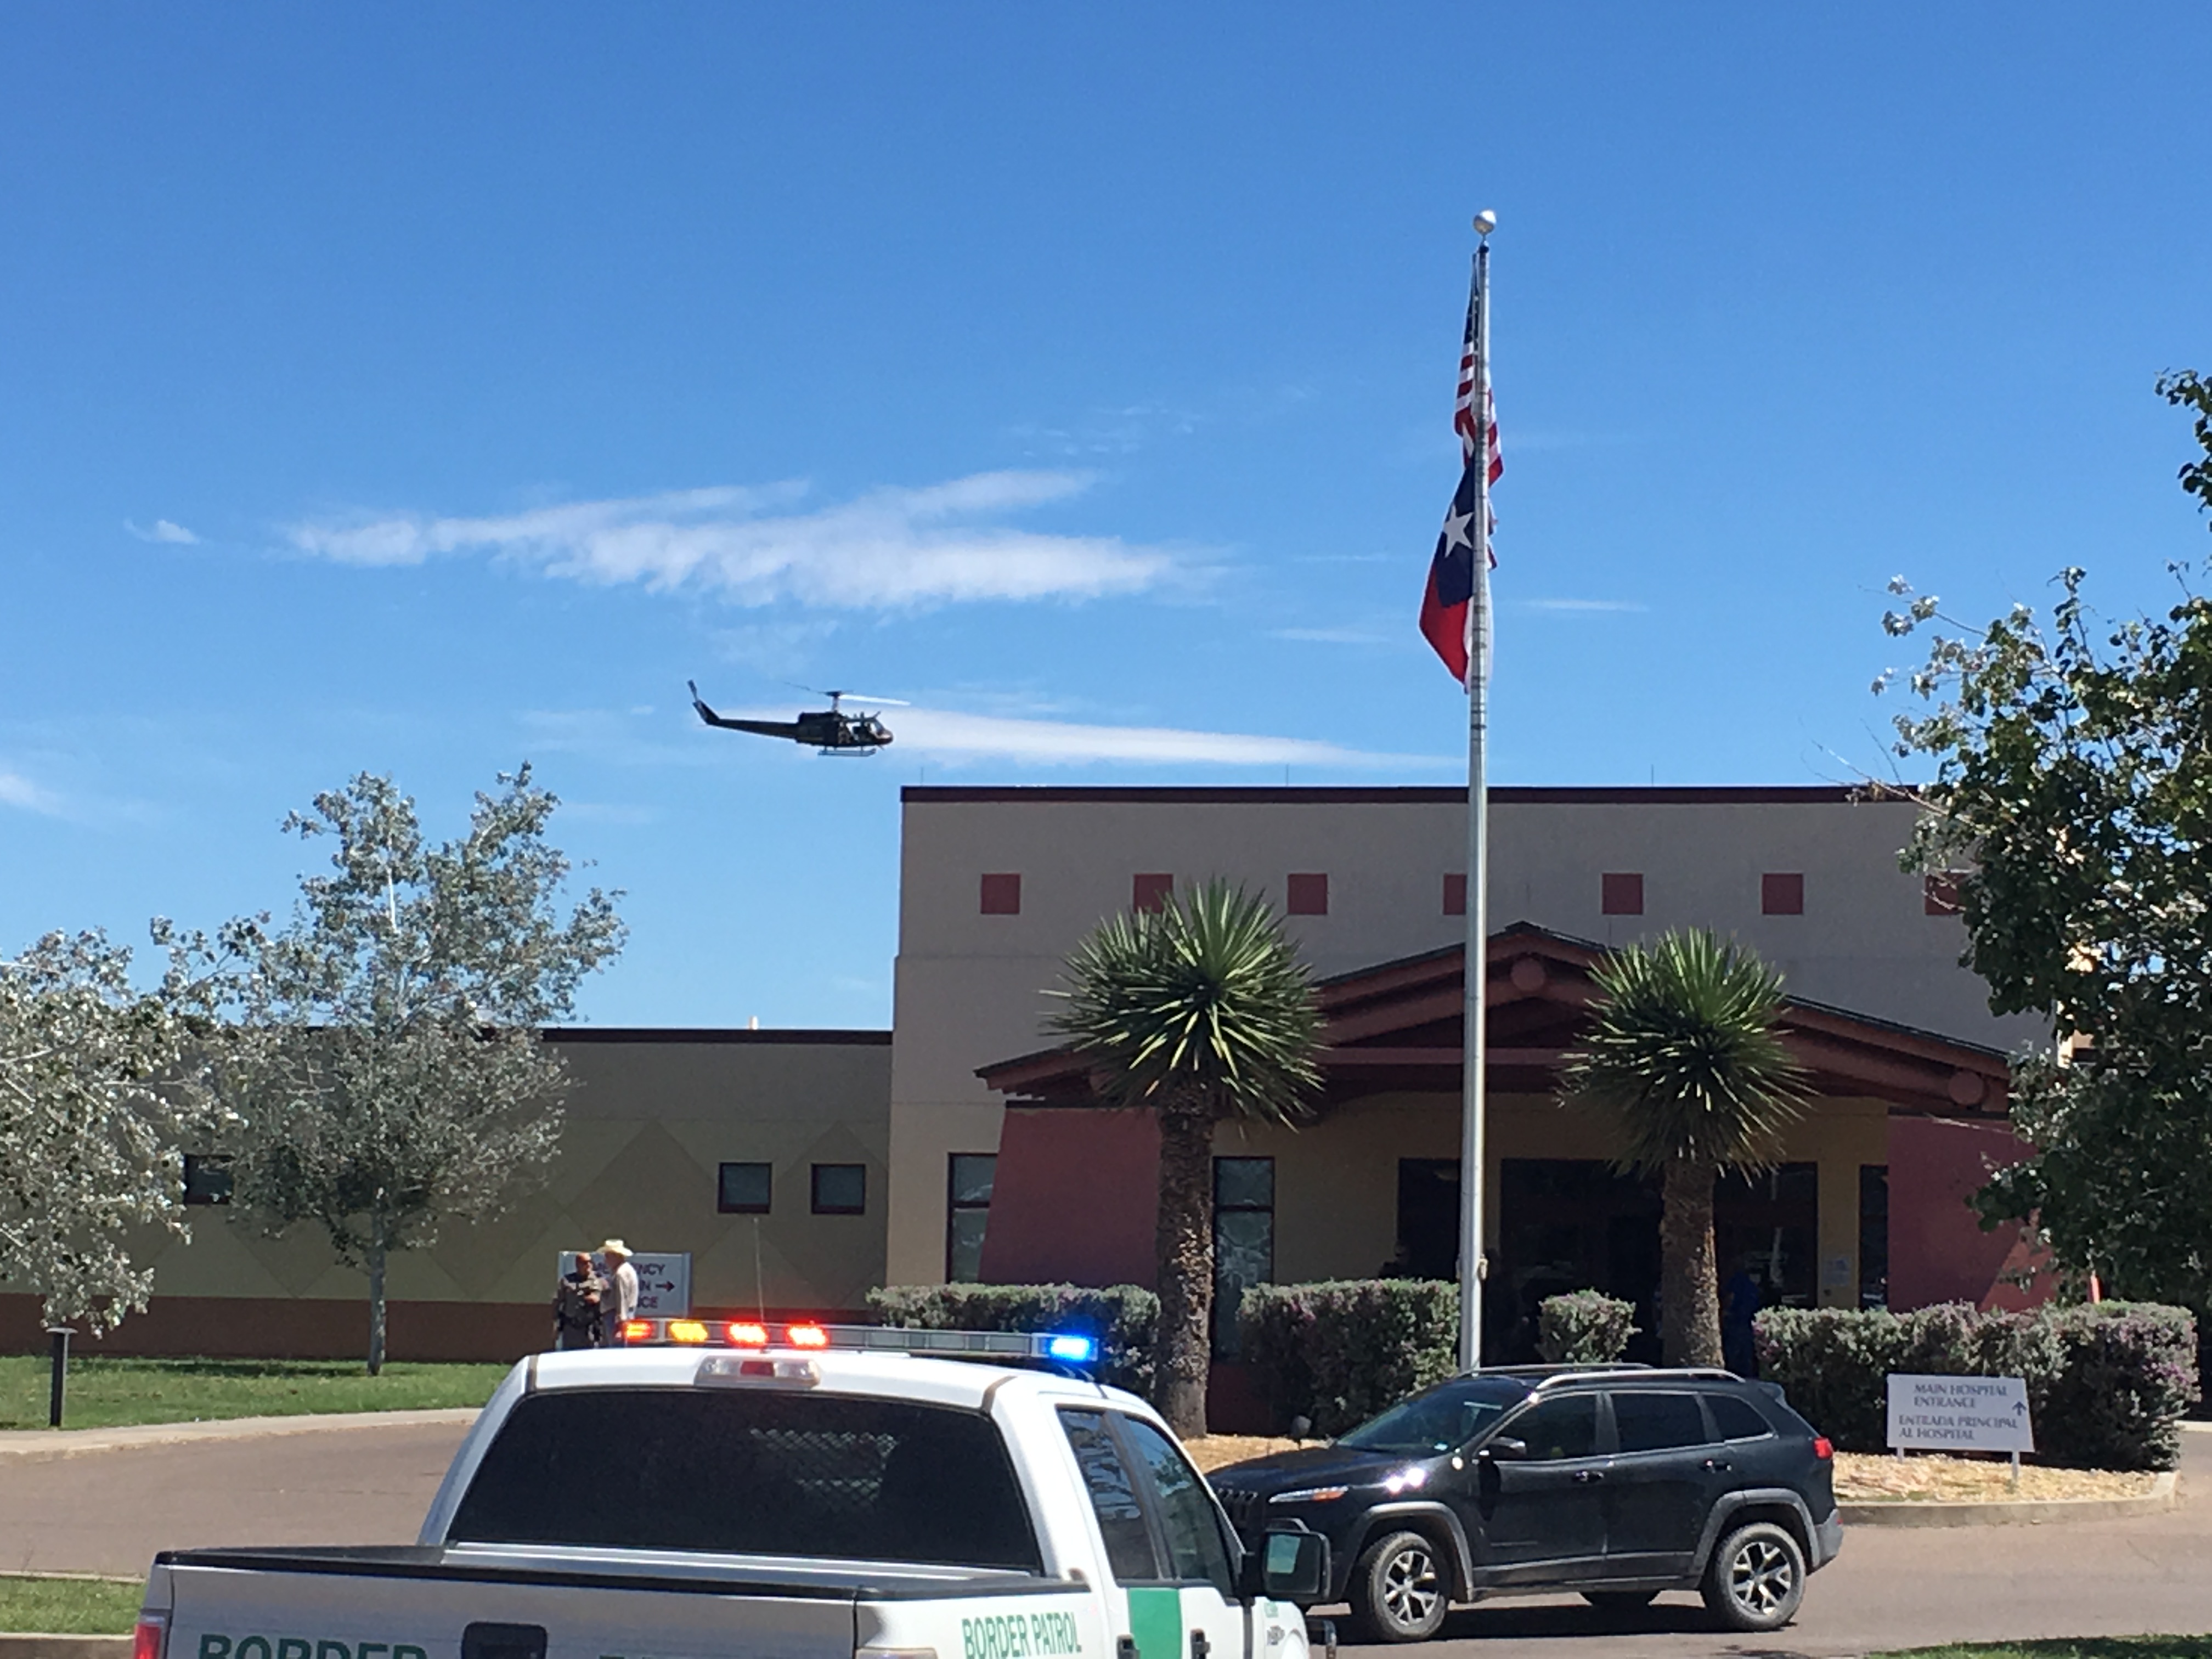 Various federal, state and local law enforcement arrived at the Big Bend Regional Medical Center in Alpine, which was the subject of a bomb threat along with other locations in Alpine and Marathon, TX on Thursday. 